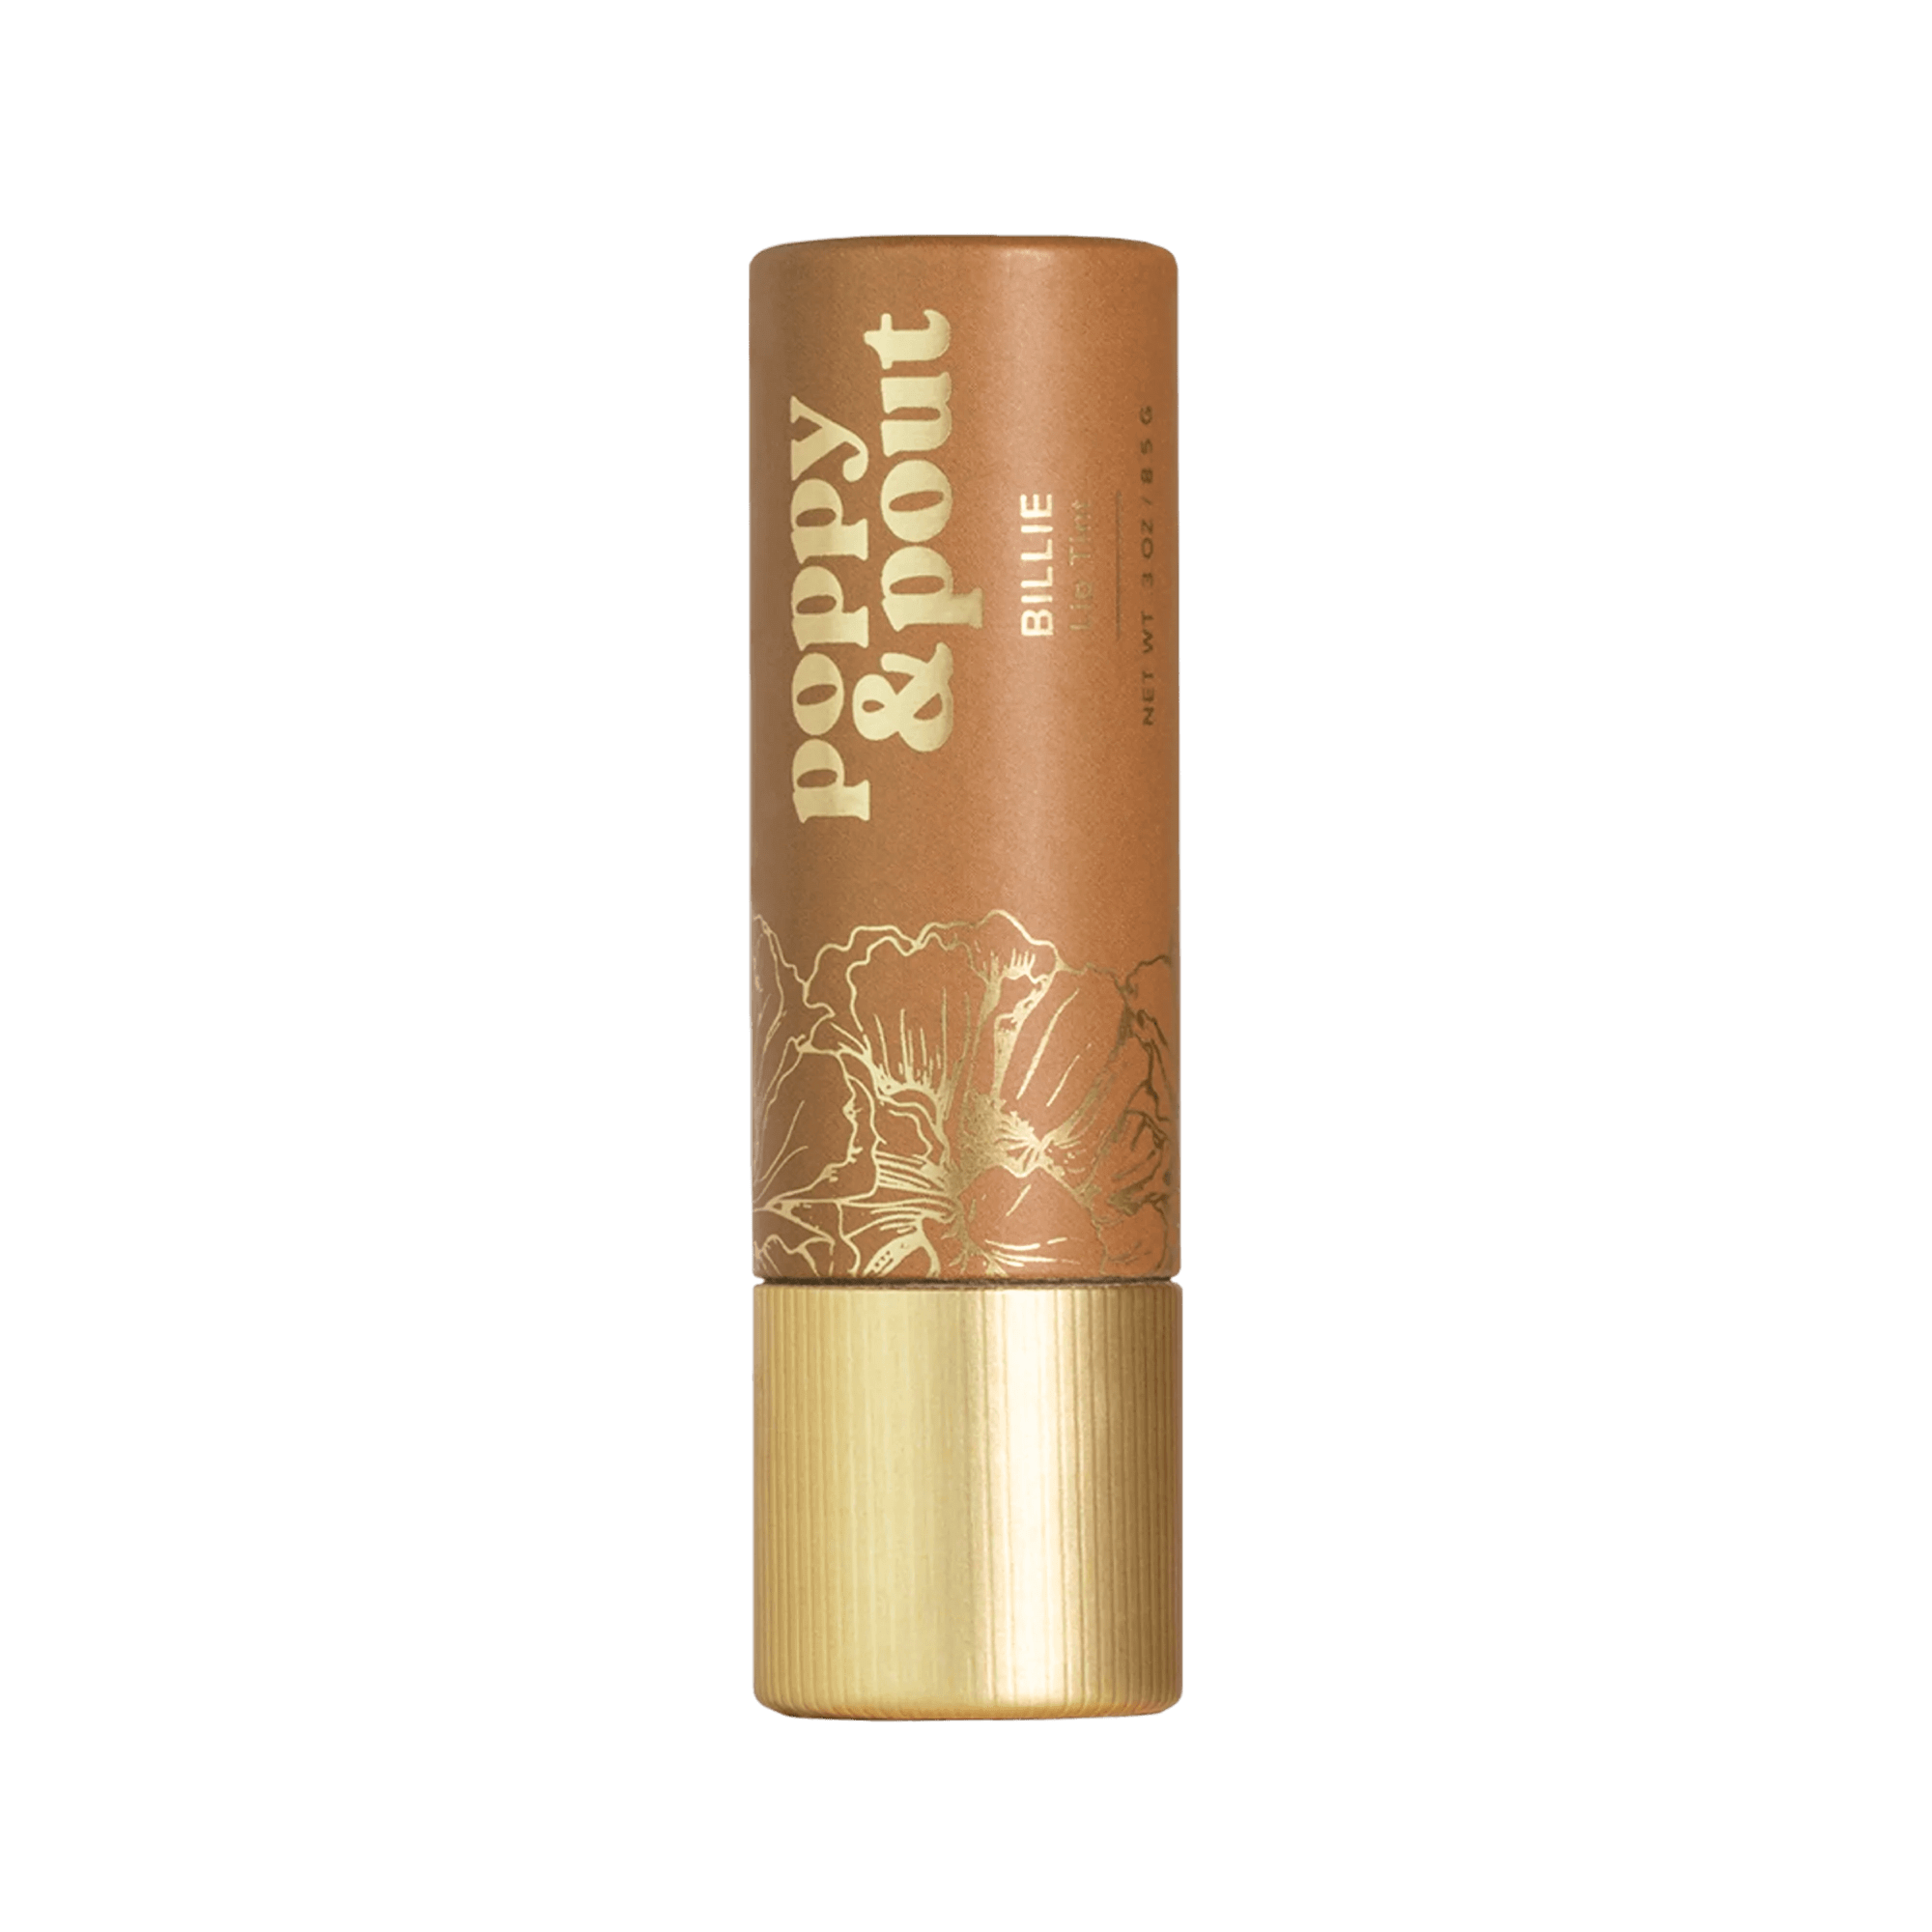 Poppy & Pout Lip Balms Poppy and Pout, Billie, Tinted Lip Balm made in Idaho, USA